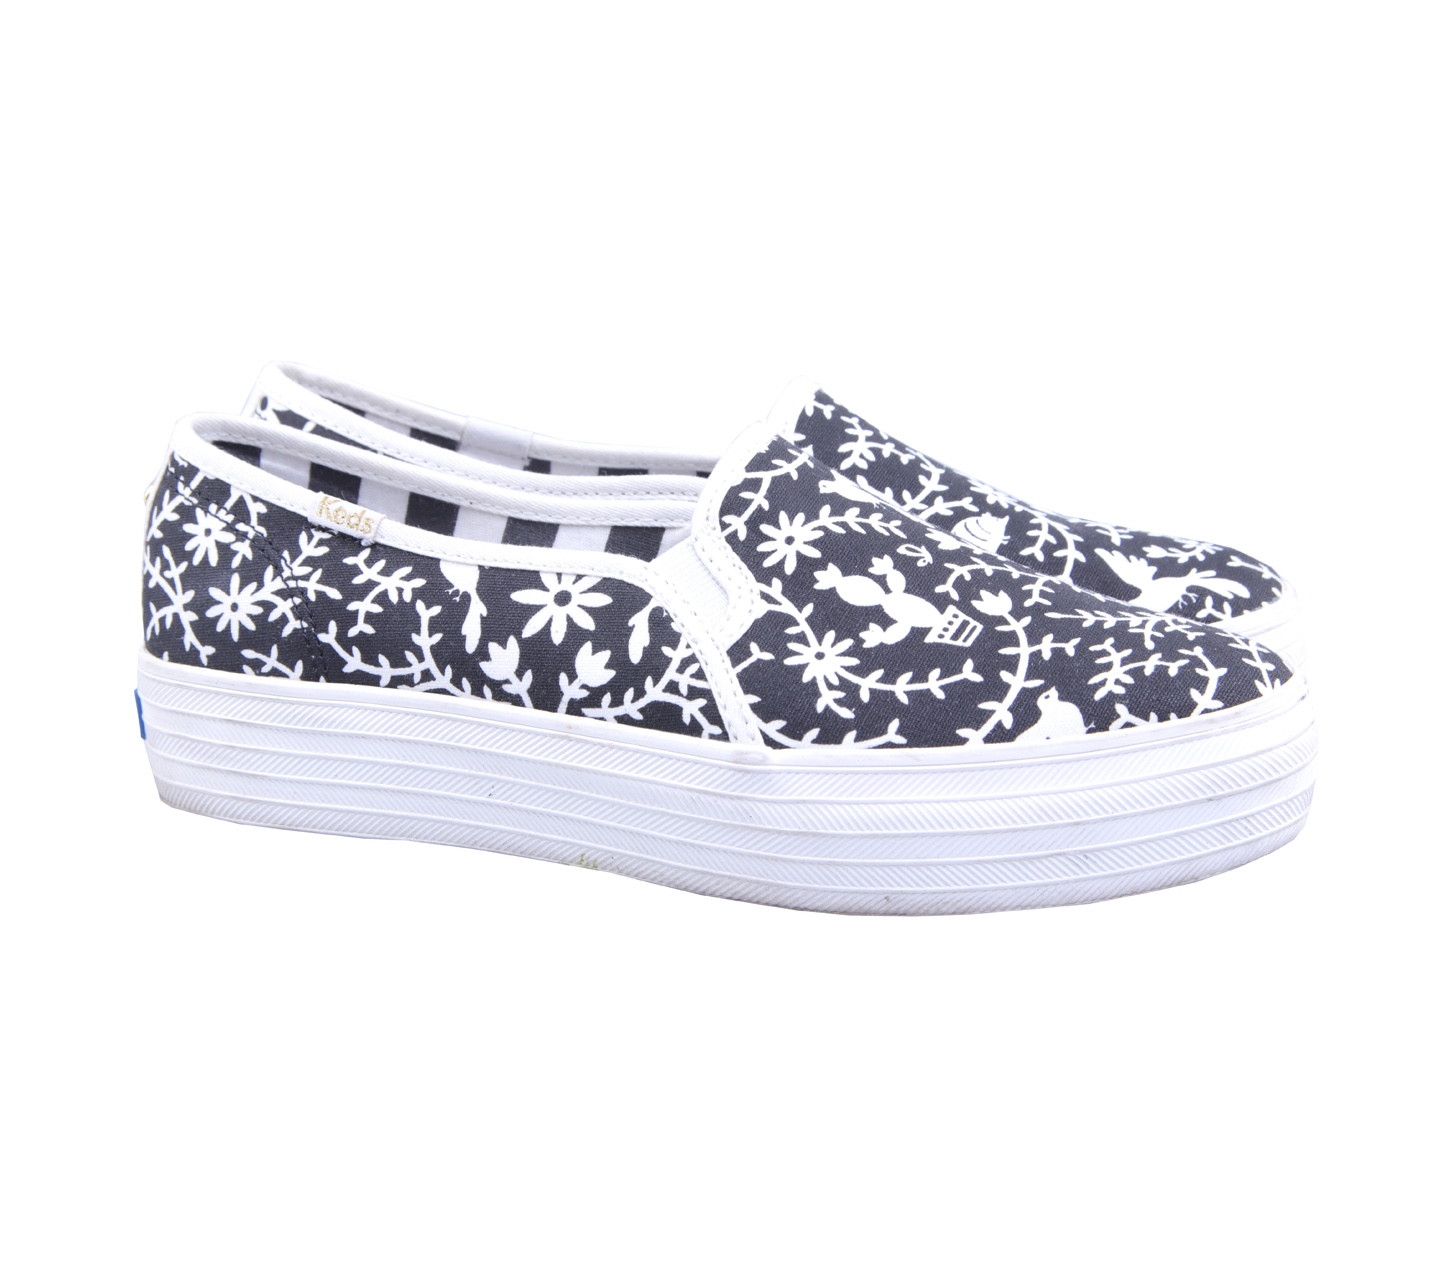 Keds For Kate Spade Black And White Slip on shoes Flats